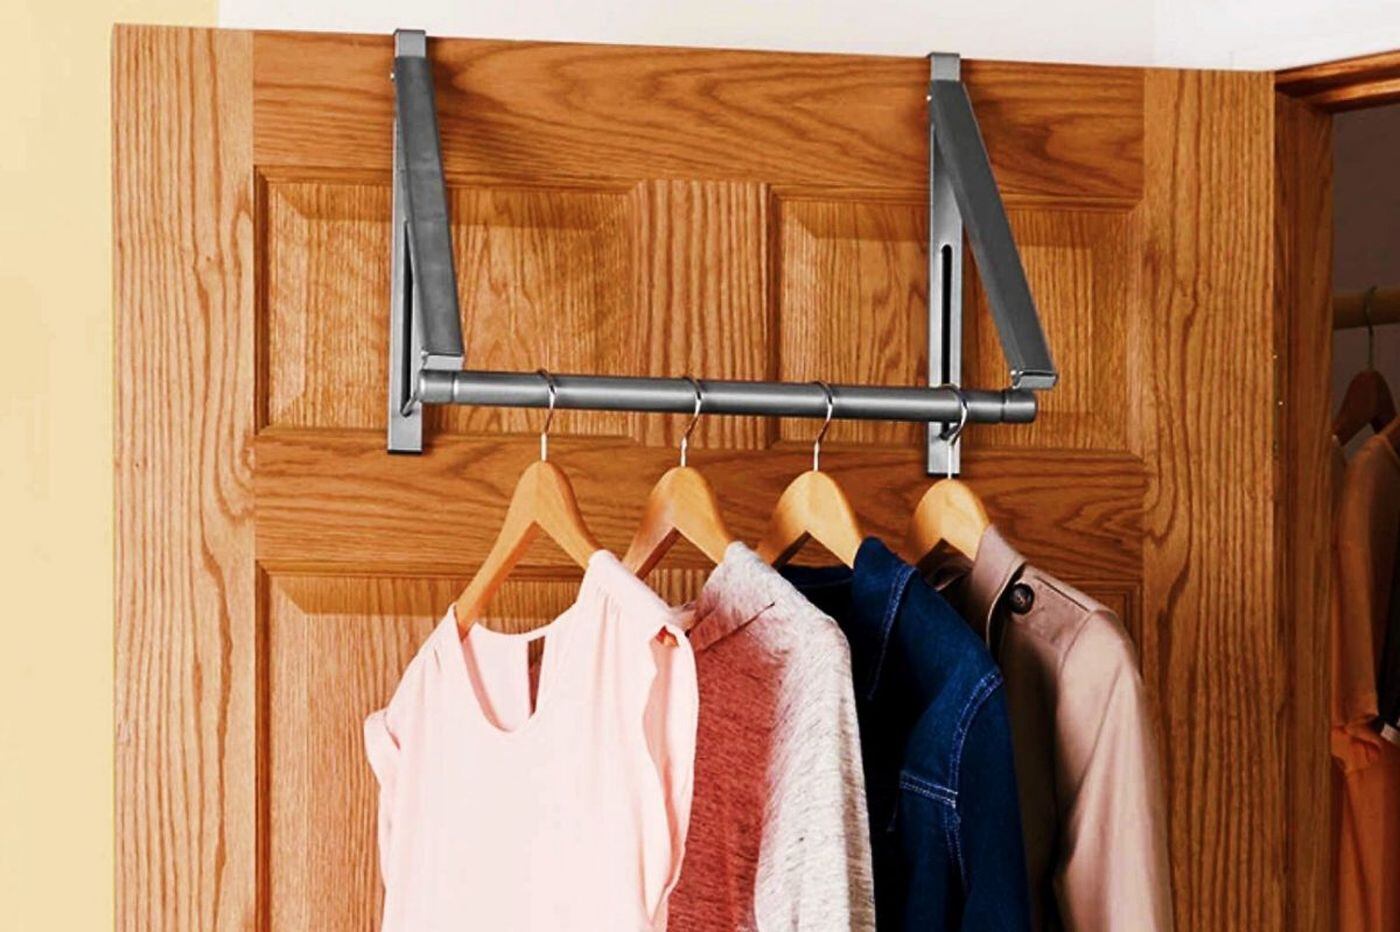 Clothes Rack Over The Door Valet Collapsible Metal Garment Laundry Hanging